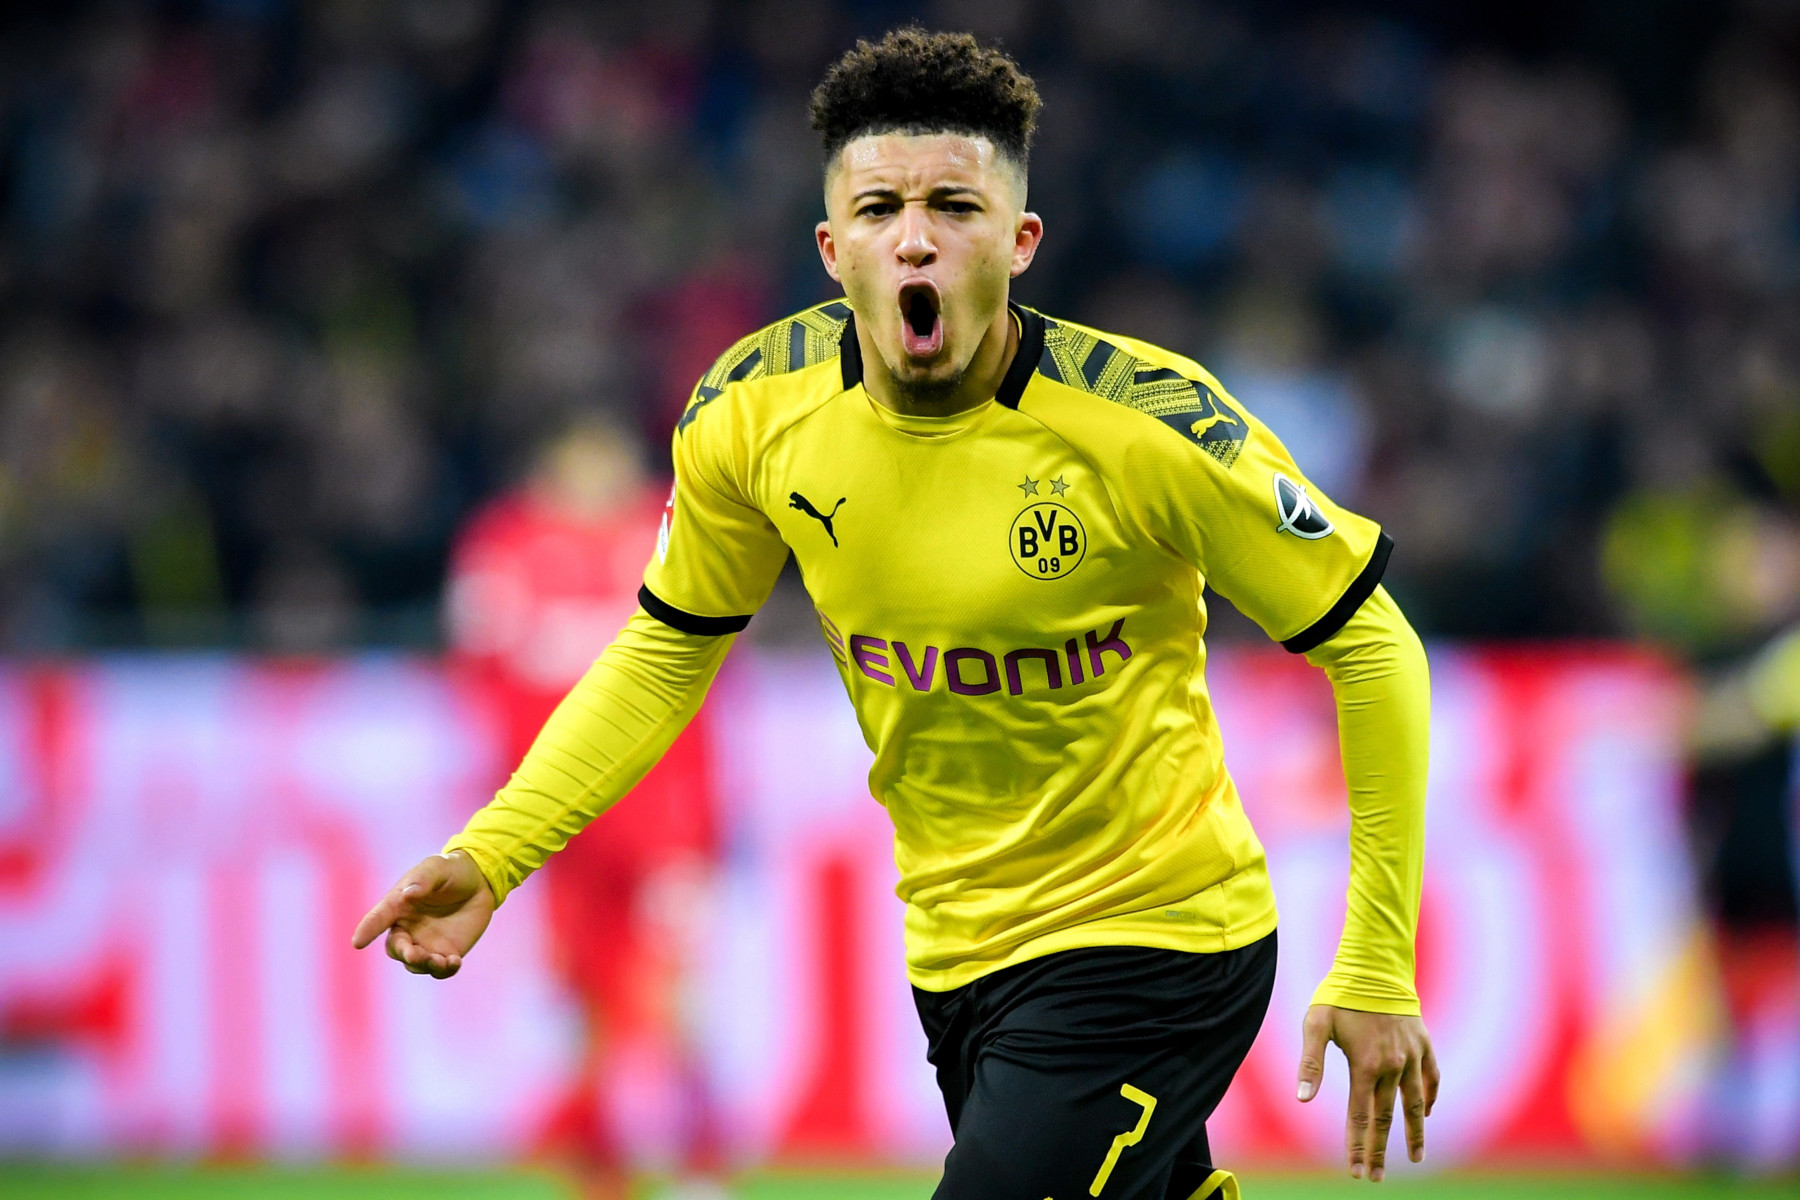 , Man Utd transfer boost in Jadon Sancho race as Liverpool pull out of £100m battle for Borussia Dortmund star